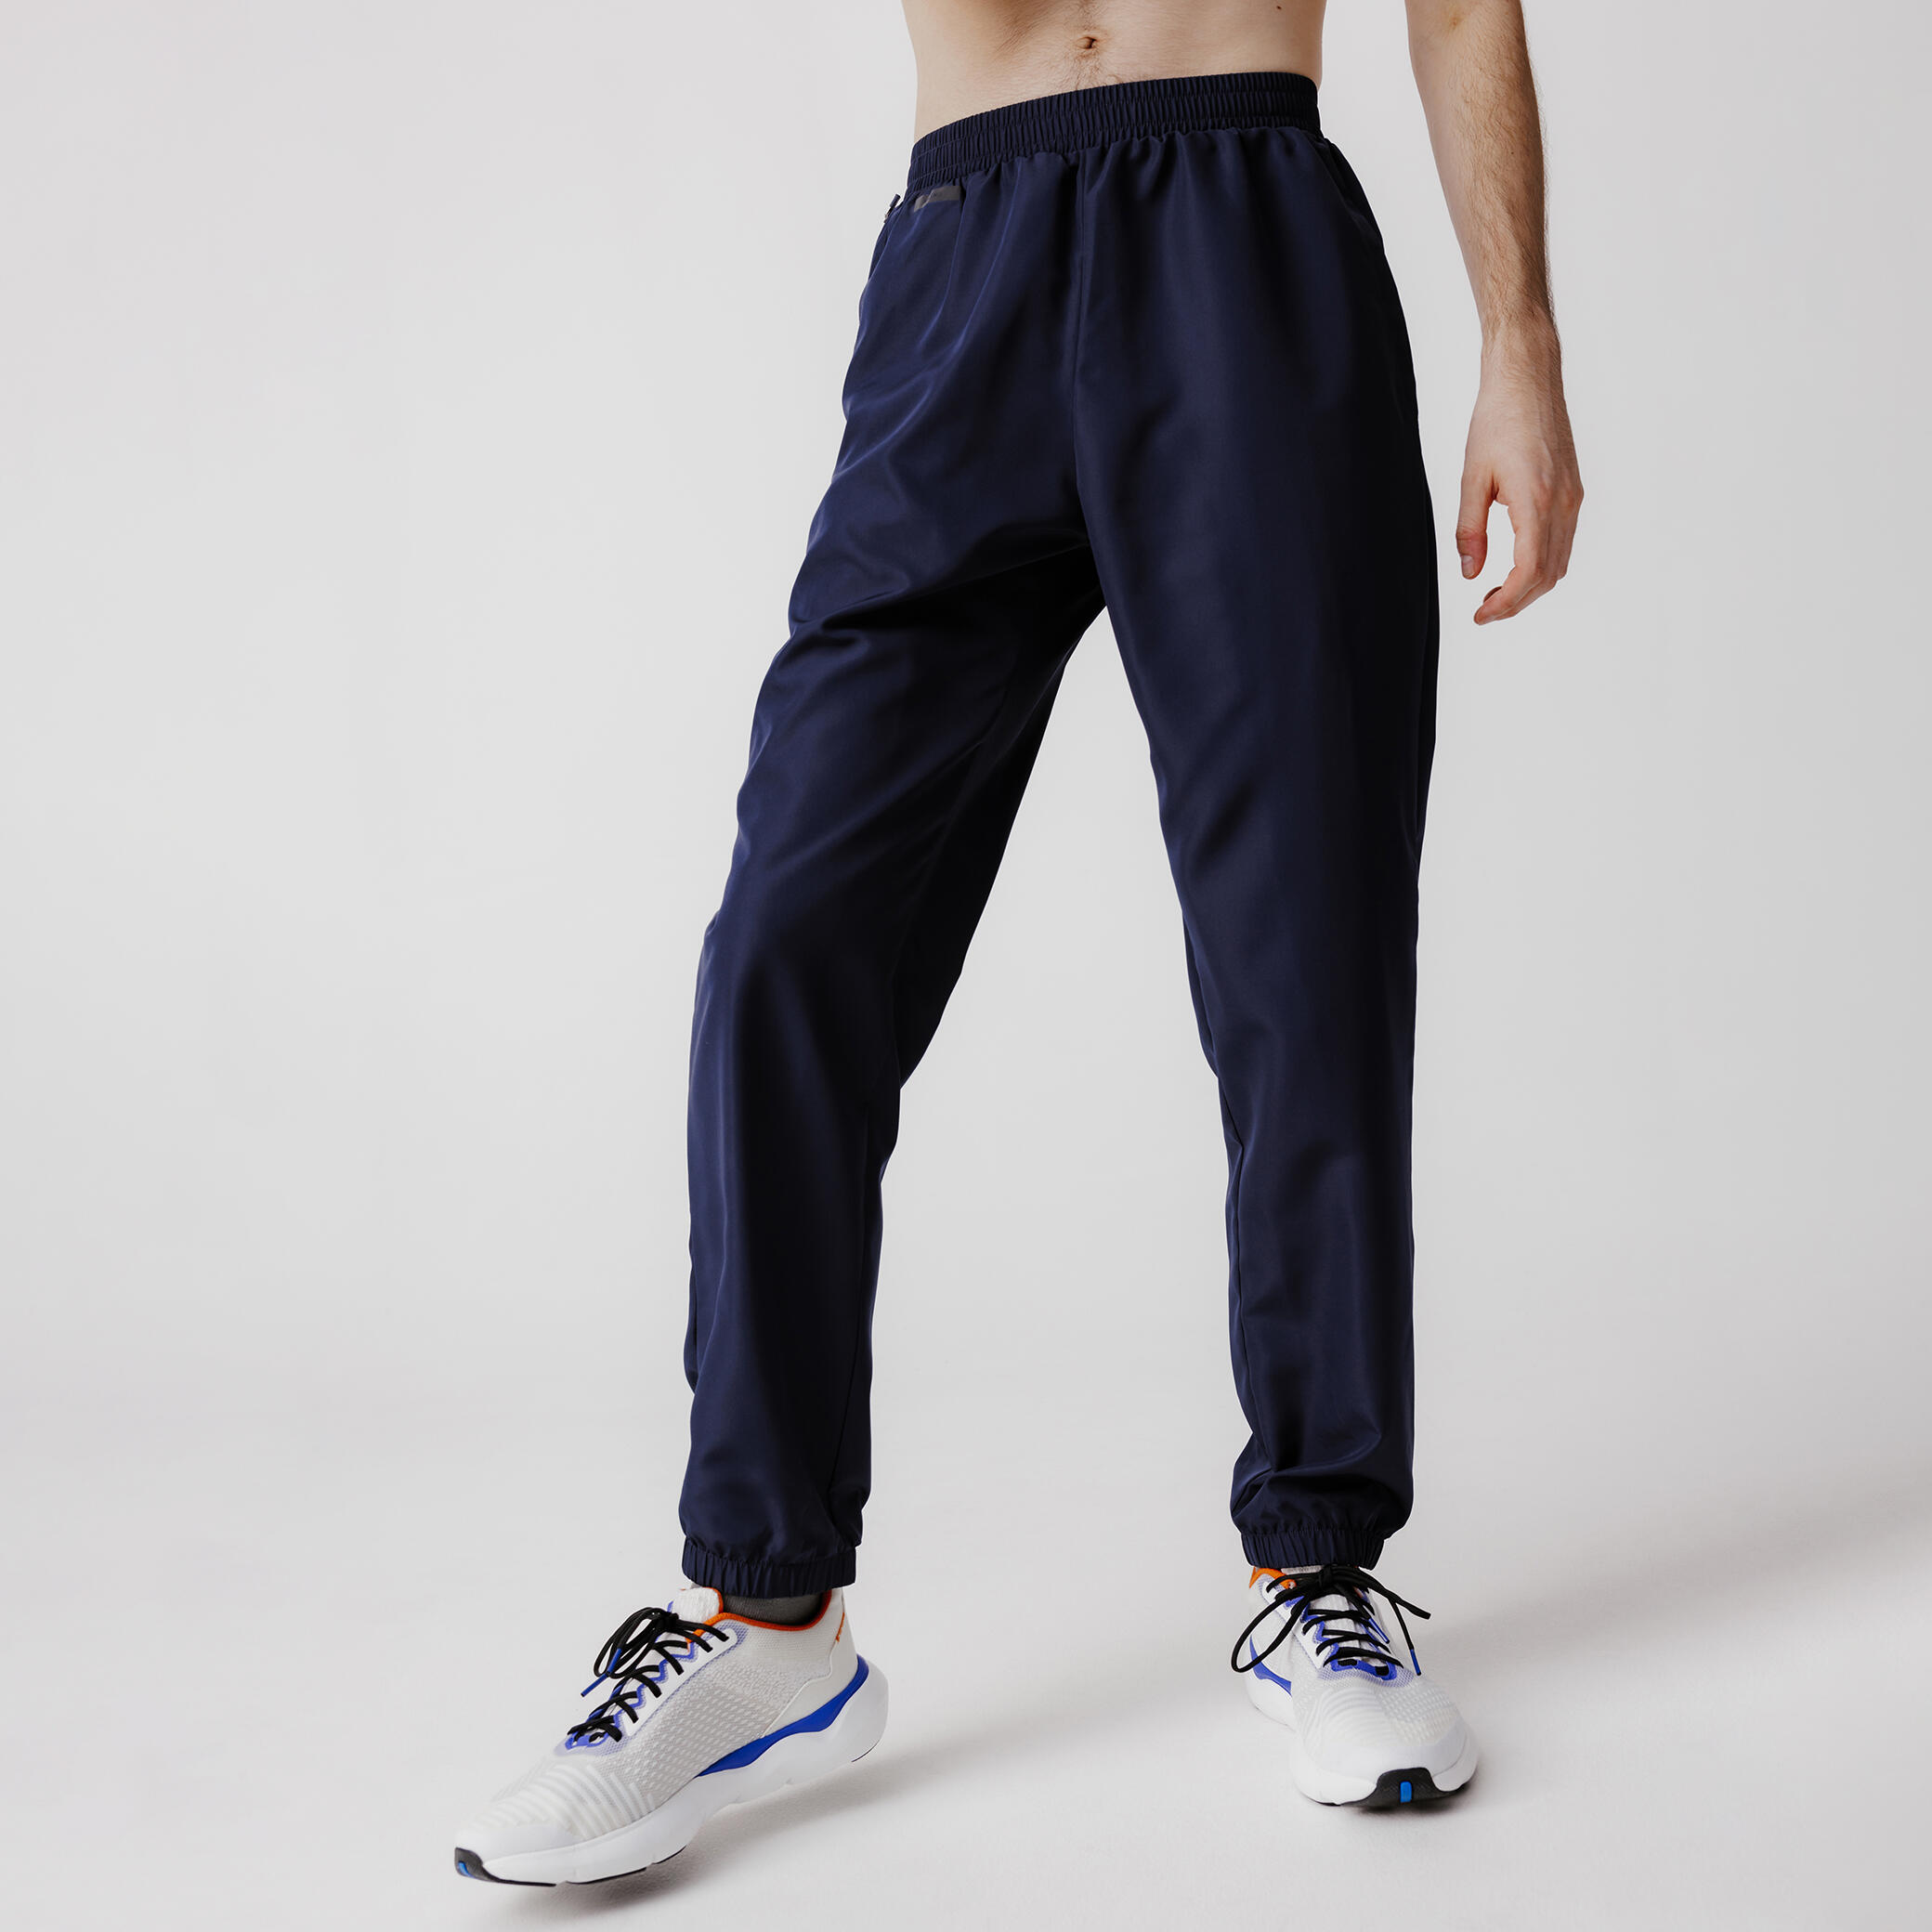 2017 On Running Pants Tracksuit Womens Navy